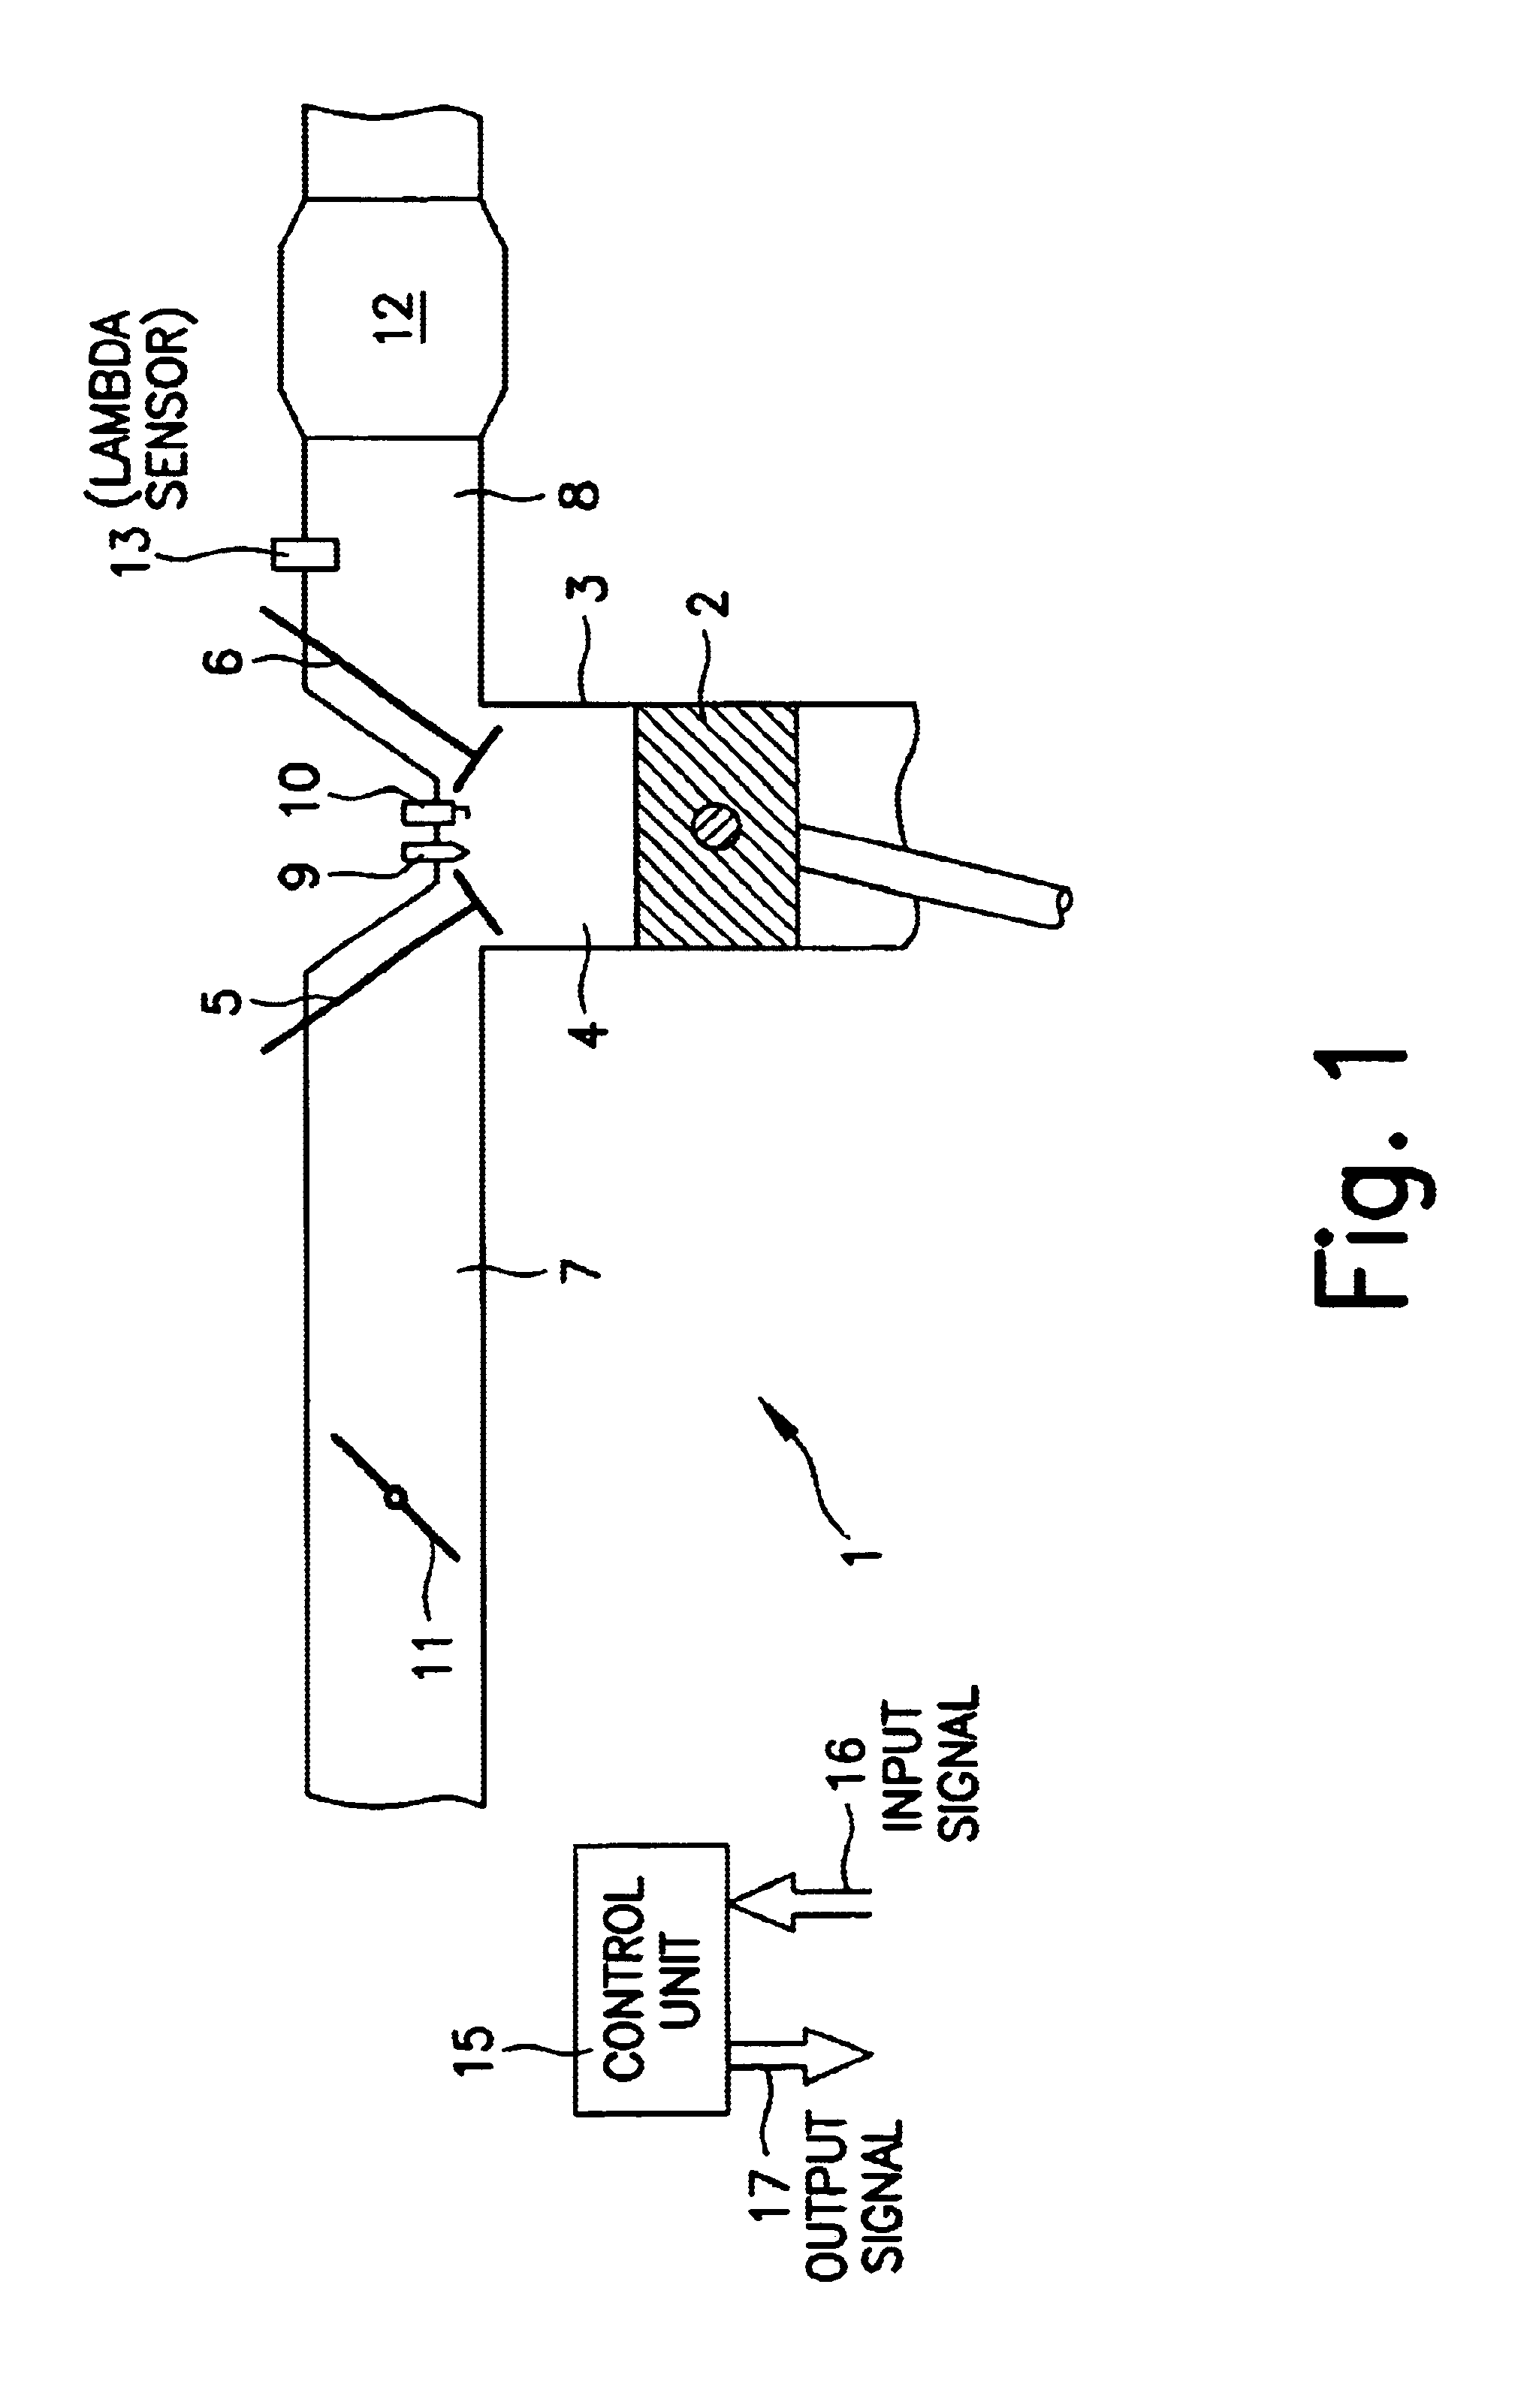 Method for compensating injection quality in each individual cylinder in internal combustion engines